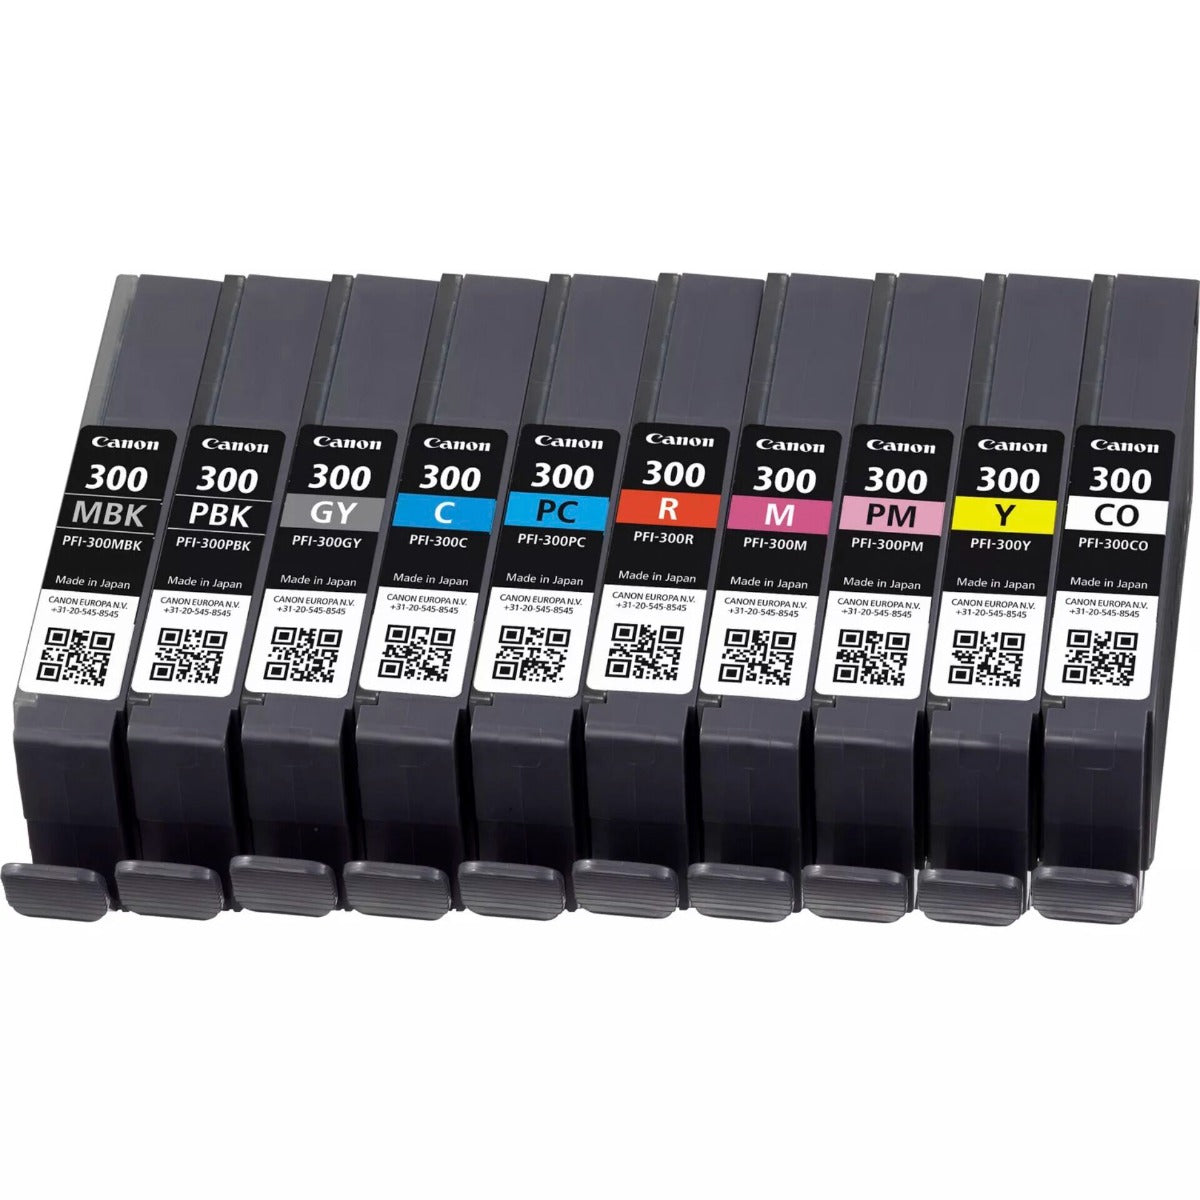 Canon PFI-300 10 Ink Multi pack for Pro 300 Printer - MBK/PBK/C/M/Y/PC/PM/R/GY/CO